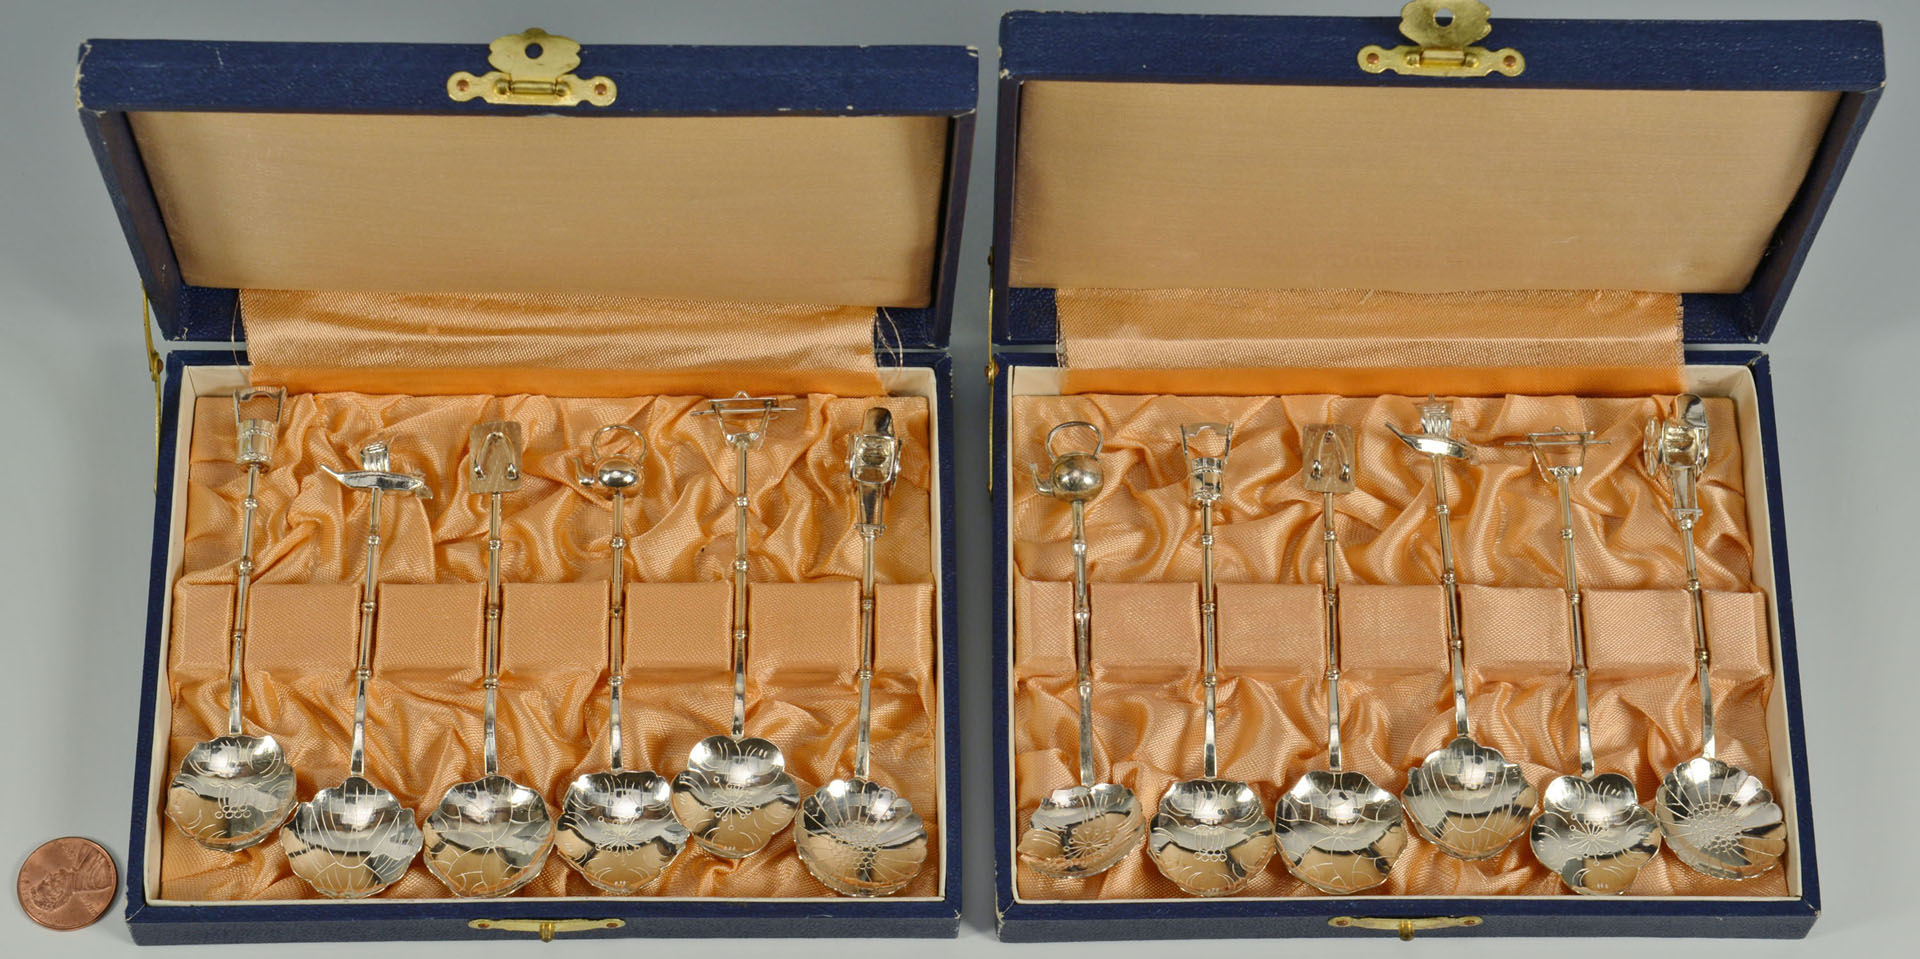 Lot 731: Set of 12 Japanese .950 Silver Novelty Spoons